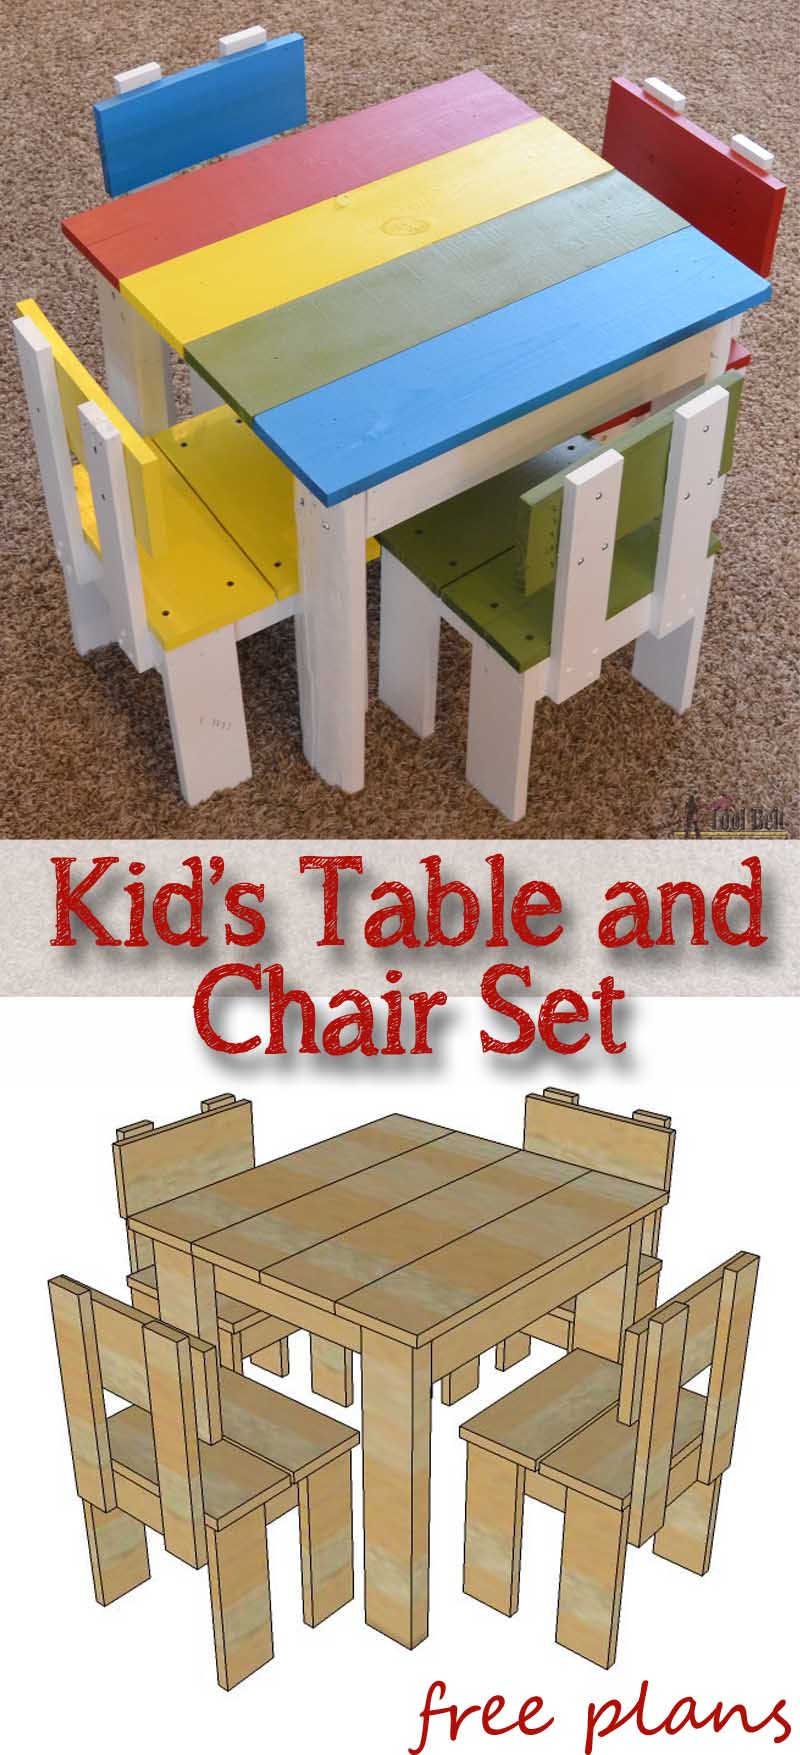  picnic table plans. Simple Dog house Plans. ft worth covered patio and